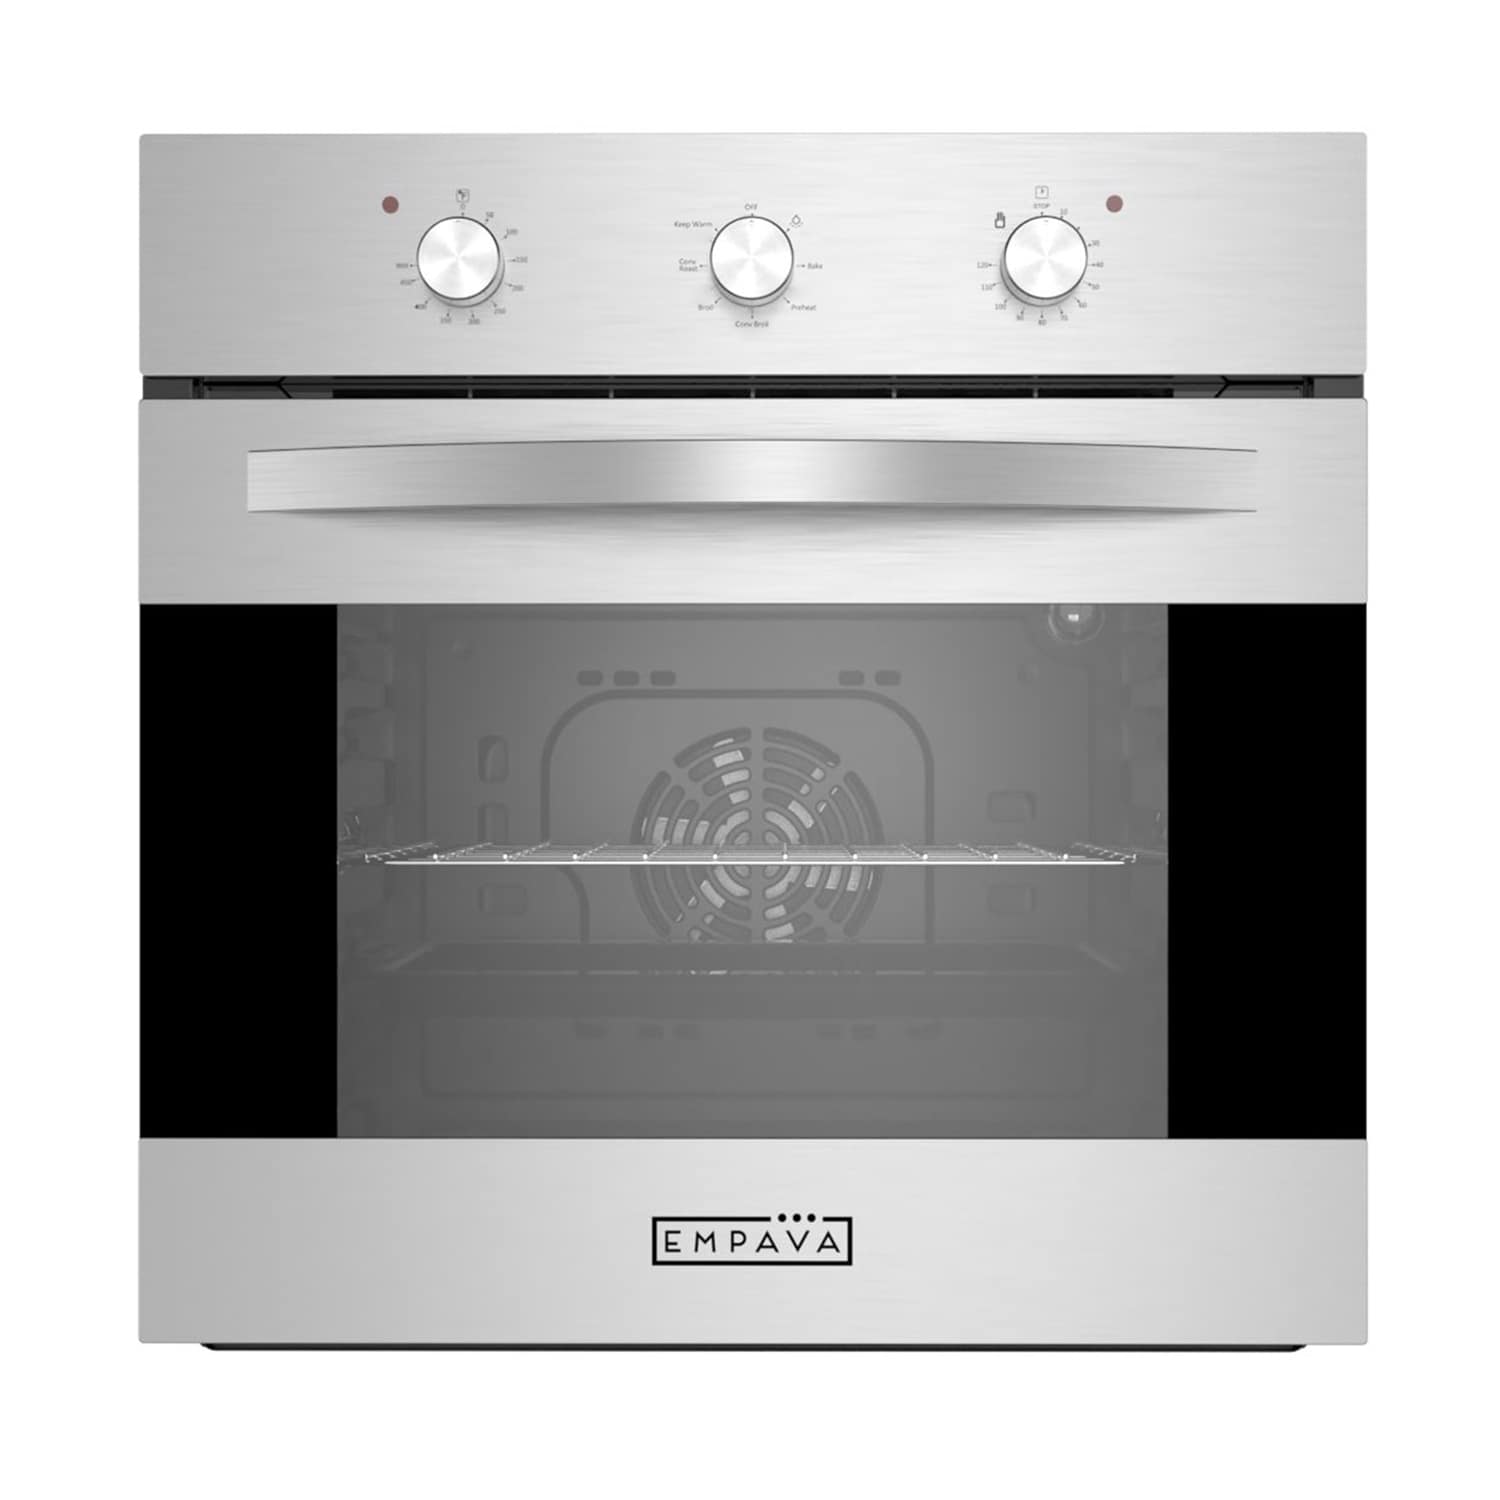 24 Inches Wall Oven - Bed Bath & Beyond